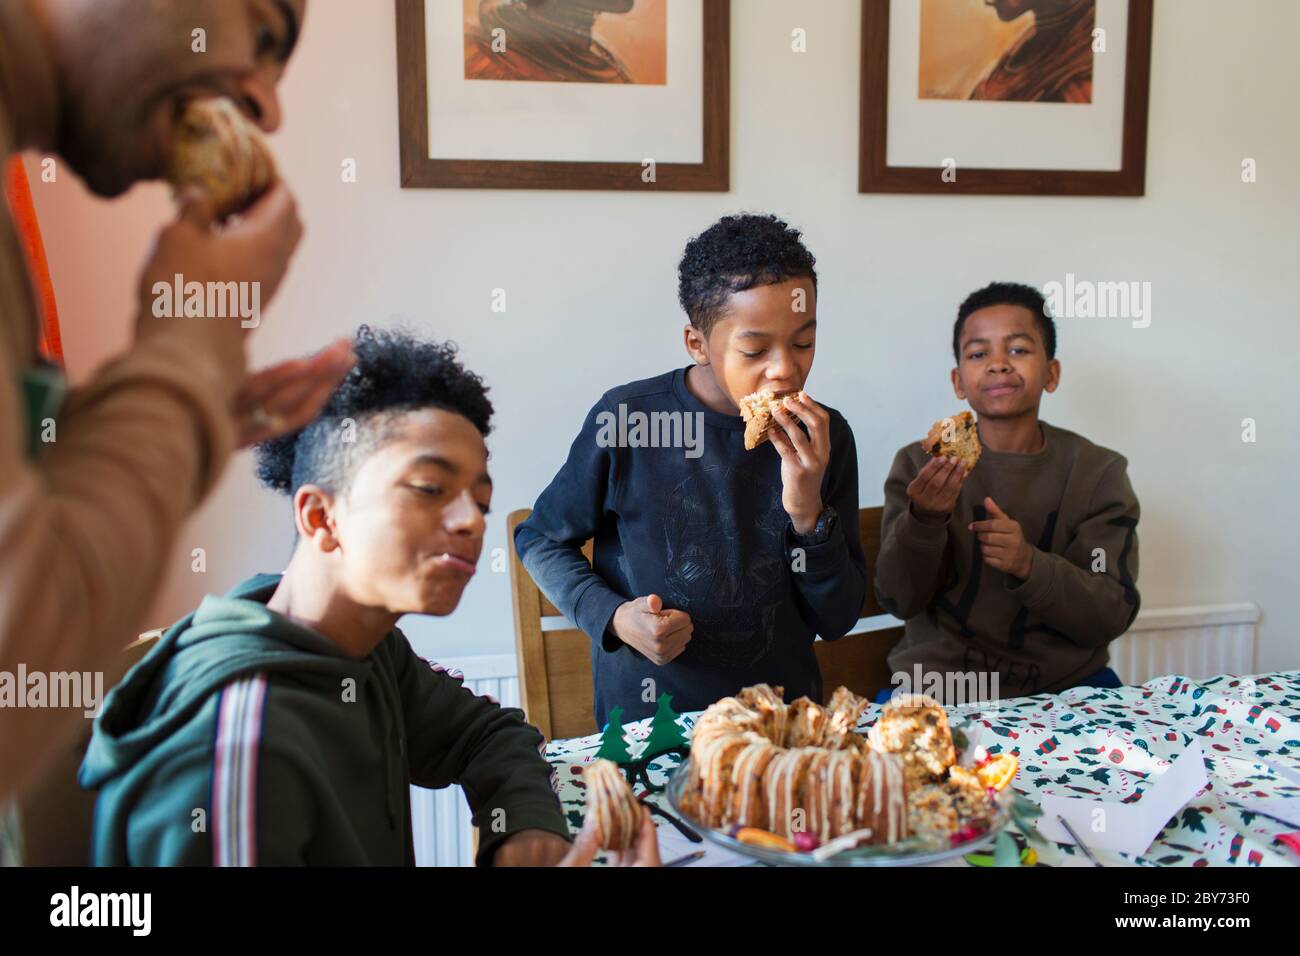 Father and sons eating Christmas cake at table Stock Photo